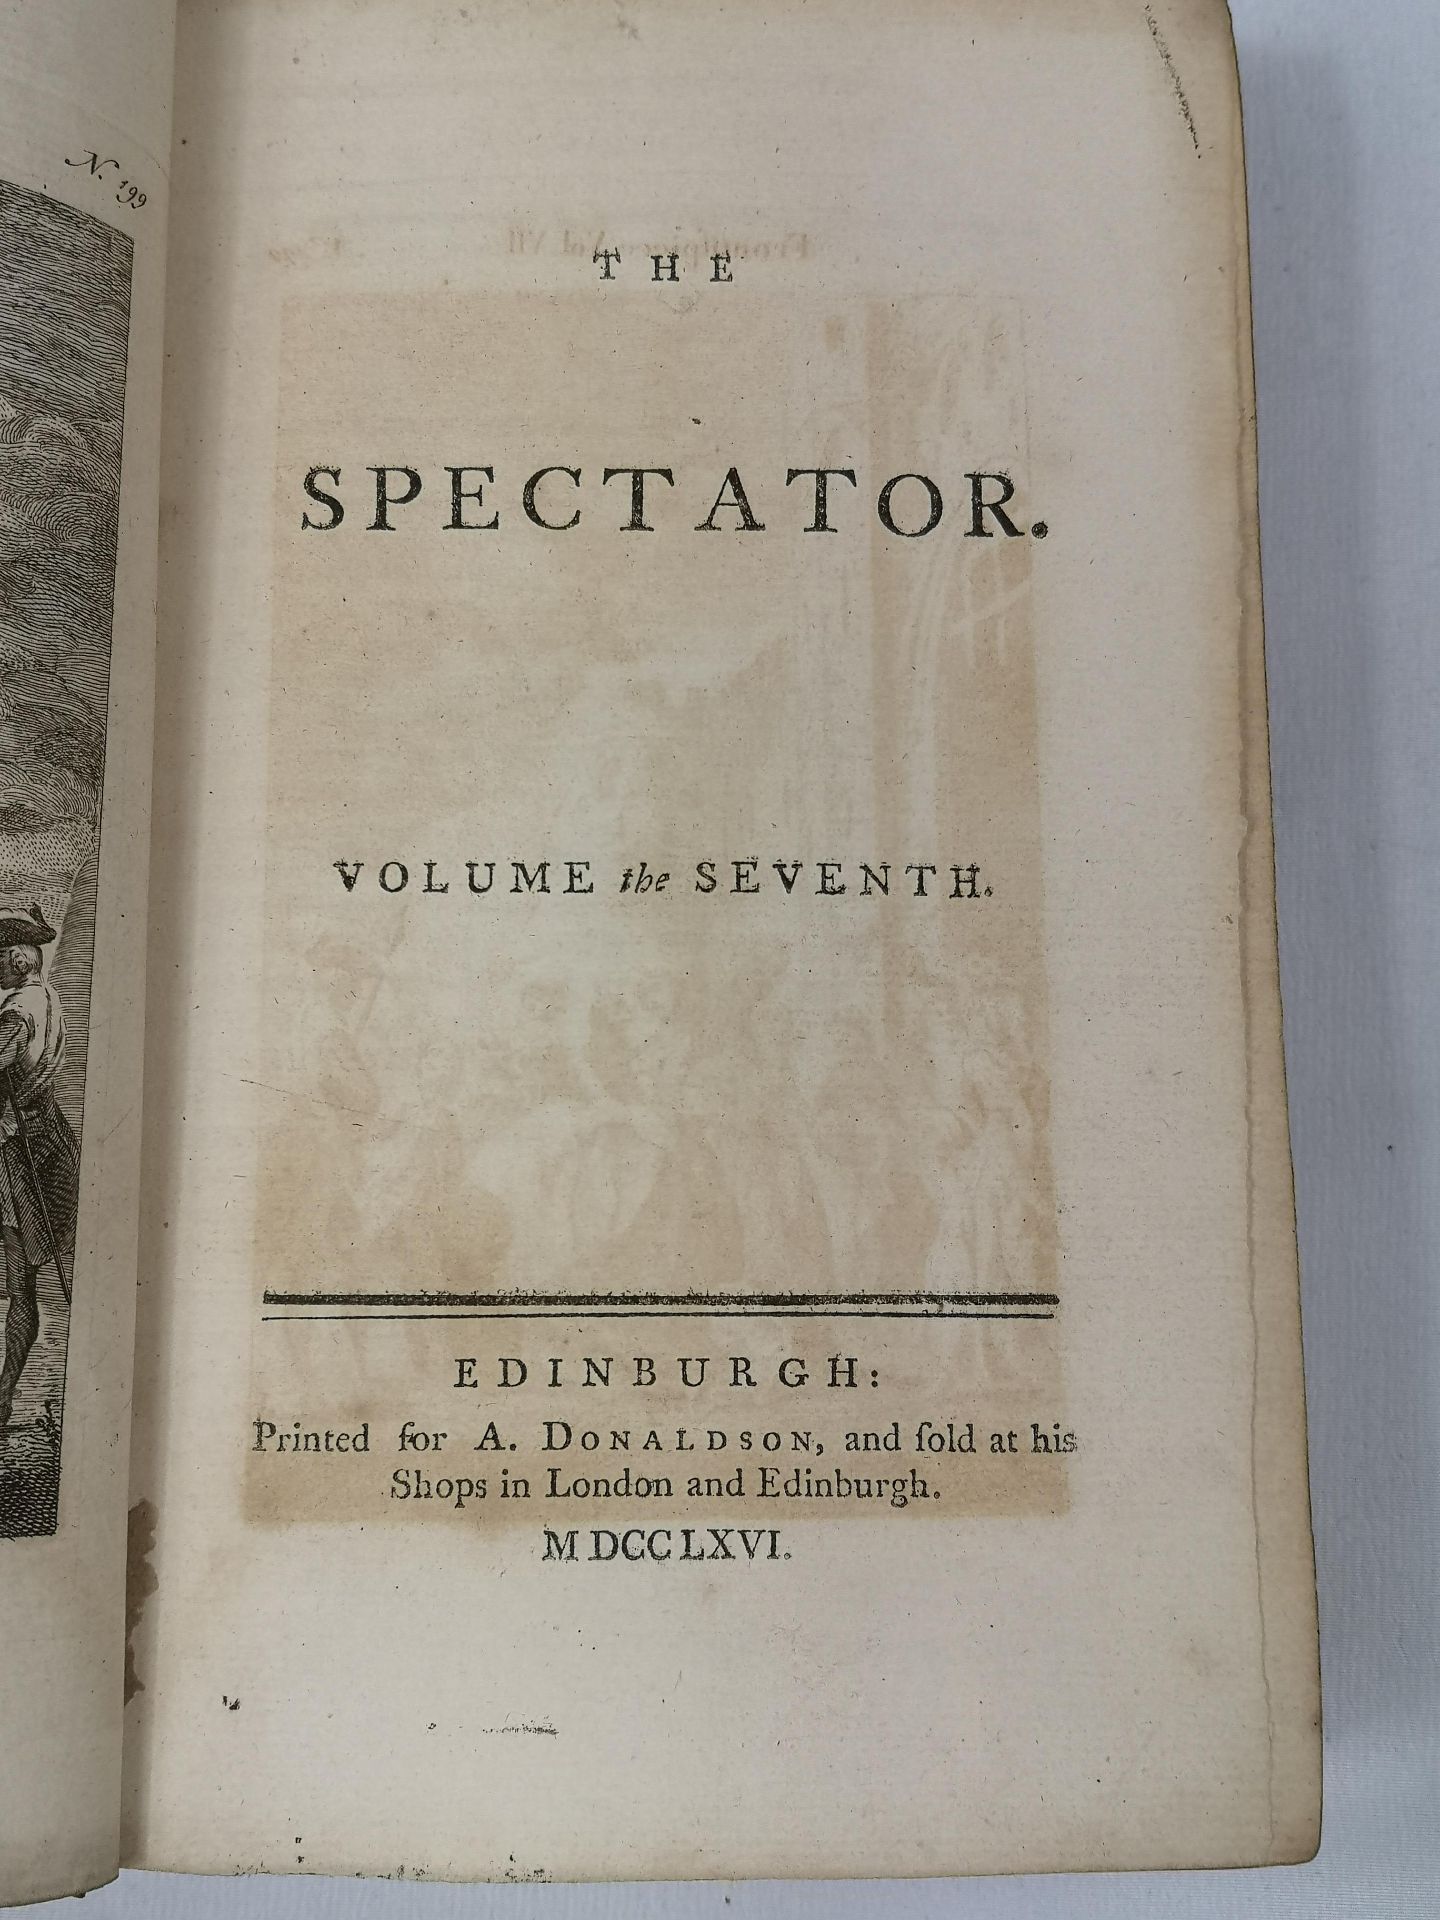 The Spectator, 2 volumes. Published London 1766 - Image 3 of 4